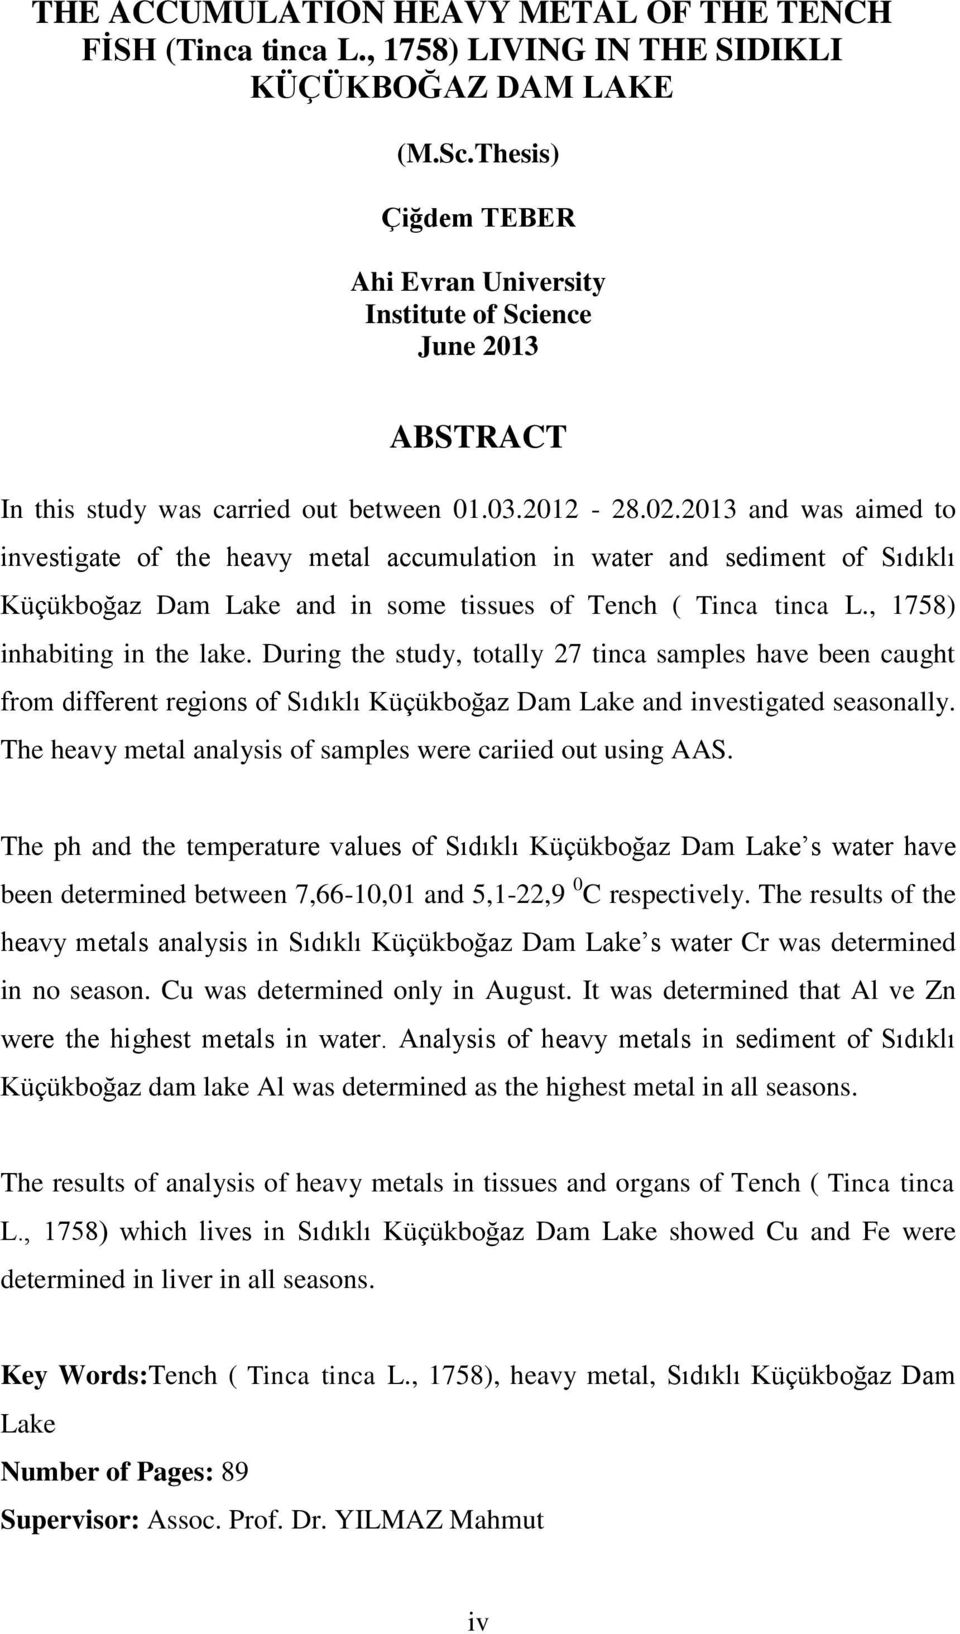 2013 and was aimed to investigate of the heavy metal accumulation in water and sediment of Sıdıklı Küçükboğaz Dam Lake and in some tissues of Tench ( Tinca tinca L., 1758) inhabiting in the lake.